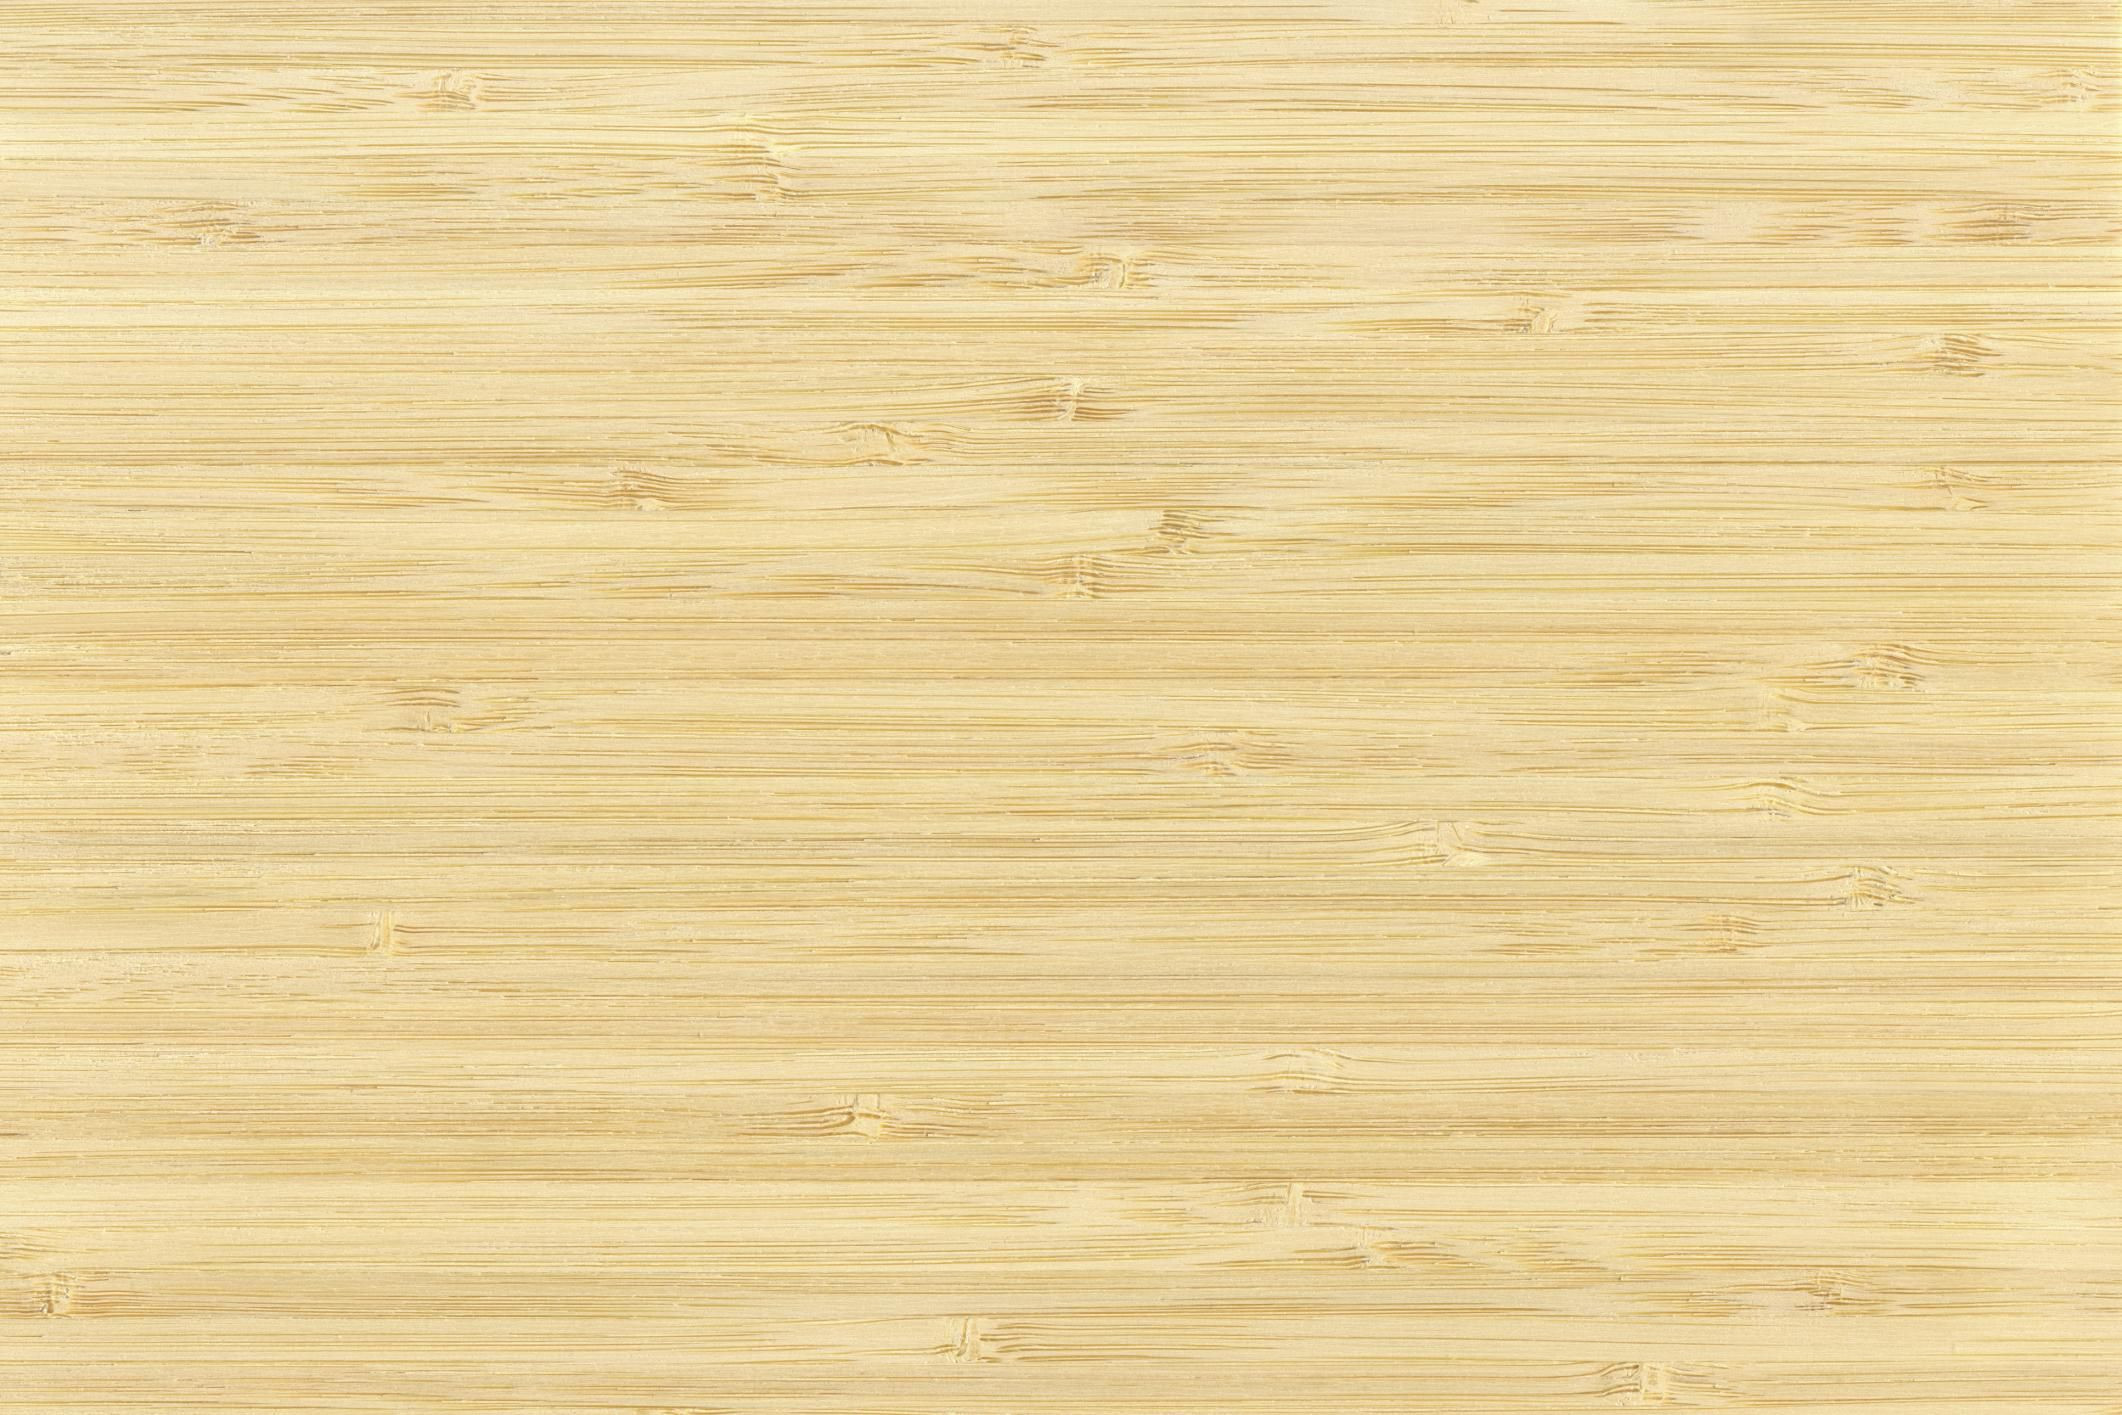 13 attractive Strand Woven Bamboo Flooring Vs Hardwood 2024 free download strand woven bamboo flooring vs hardwood of bamboo flooring in a bathroom things to consider intended for 182740579 56a2fd883df78cf7727b6d14